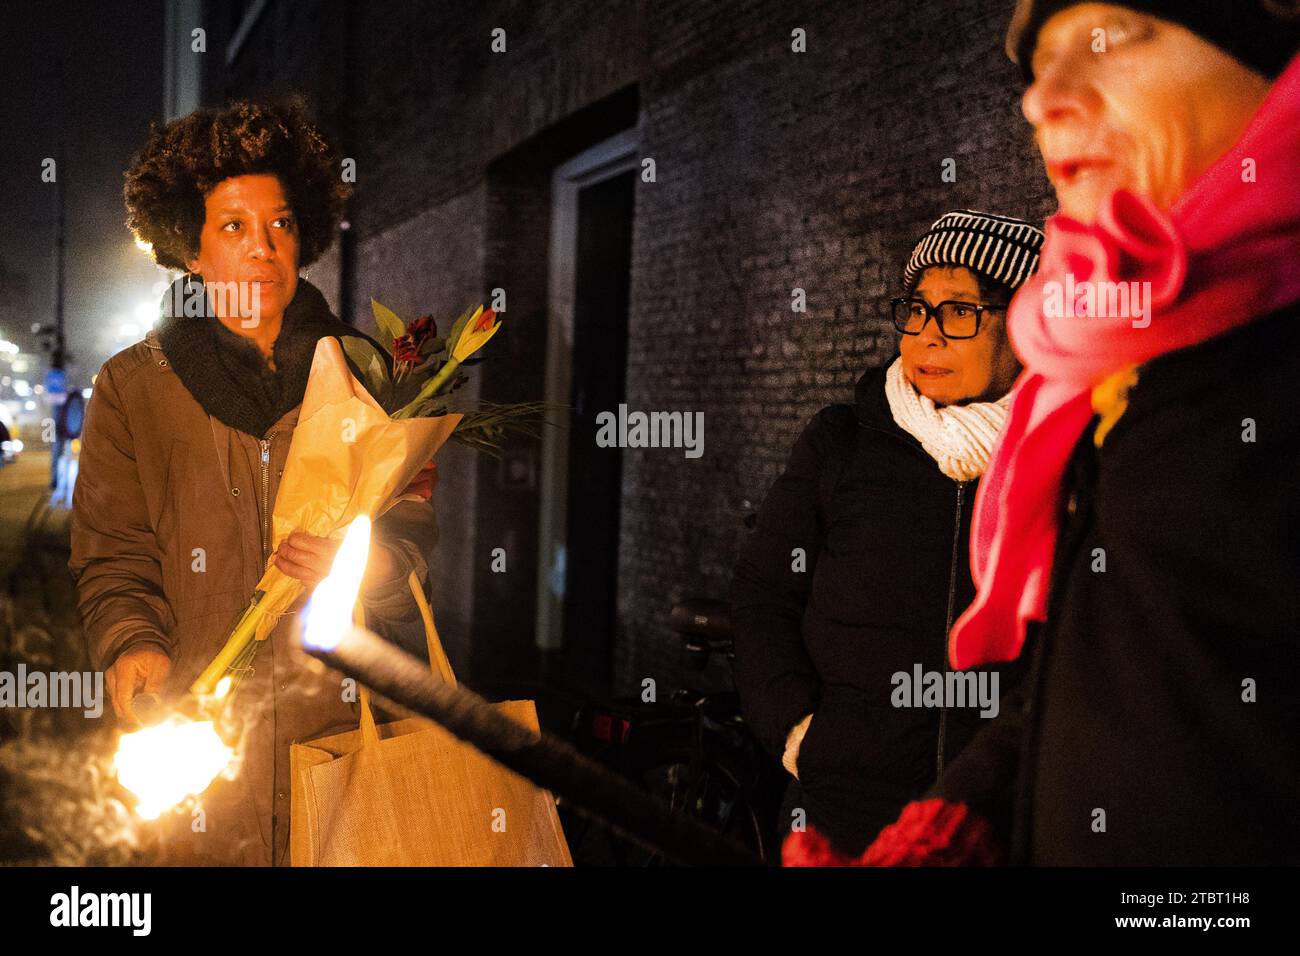 AMSTERDAM - The commemoration of the December murders. It has been 41 years since fifteen leading Surinamese were murdered under the rule of Desi Bouterse. ANP RAMON VAN FLYMEN netherlands out - belgium out Credit: ANP/Alamy Live News Stock Photo